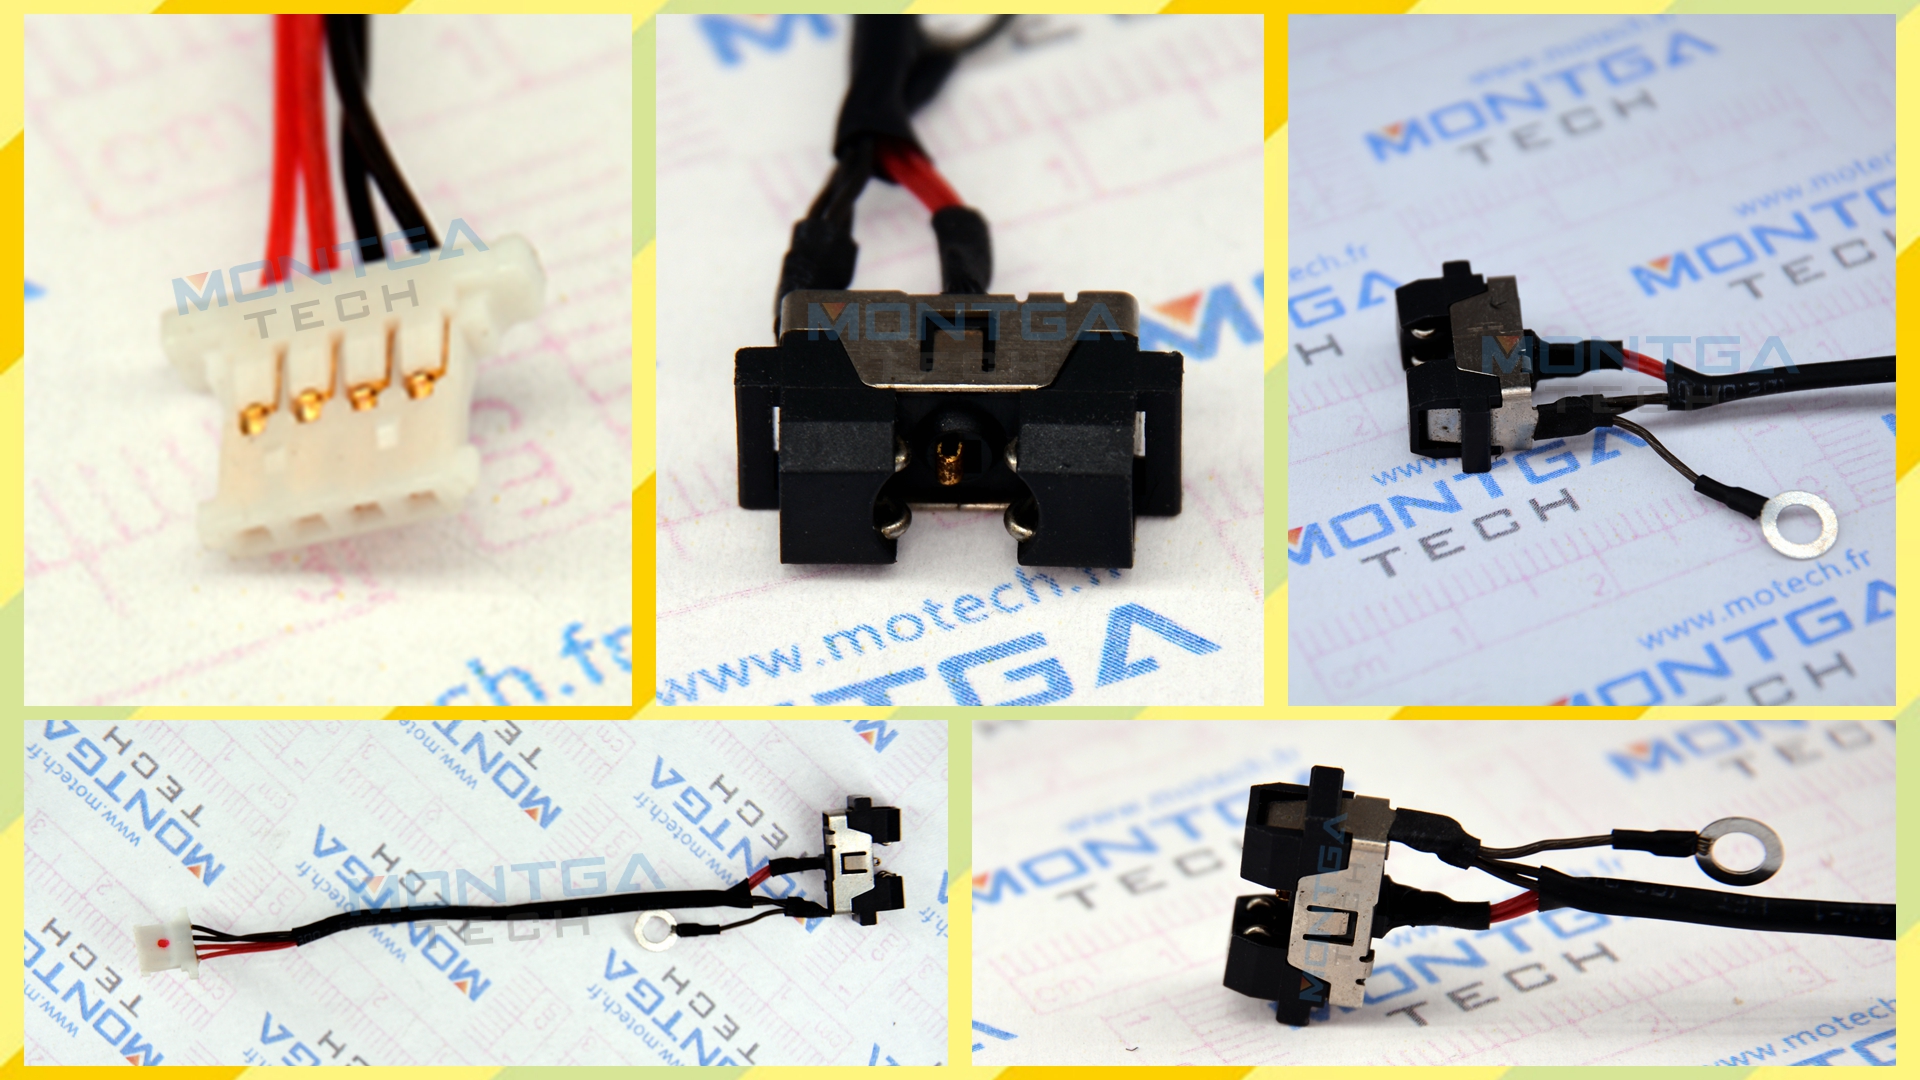 Sony Vaio SVF13NA1UM charging connector, Sony Vaio SVF13NA1UM DC Power Jack, Sony Vaio SVF13NA1UM DC IN Cable, Sony Vaio SVF13NA1UM Power Jack, Sony Vaio SVF13NA1UM plug, Sony Vaio SVF13NA1UM Jack socket, Sony Vaio SVF13NA1UM connecteur de charge, 